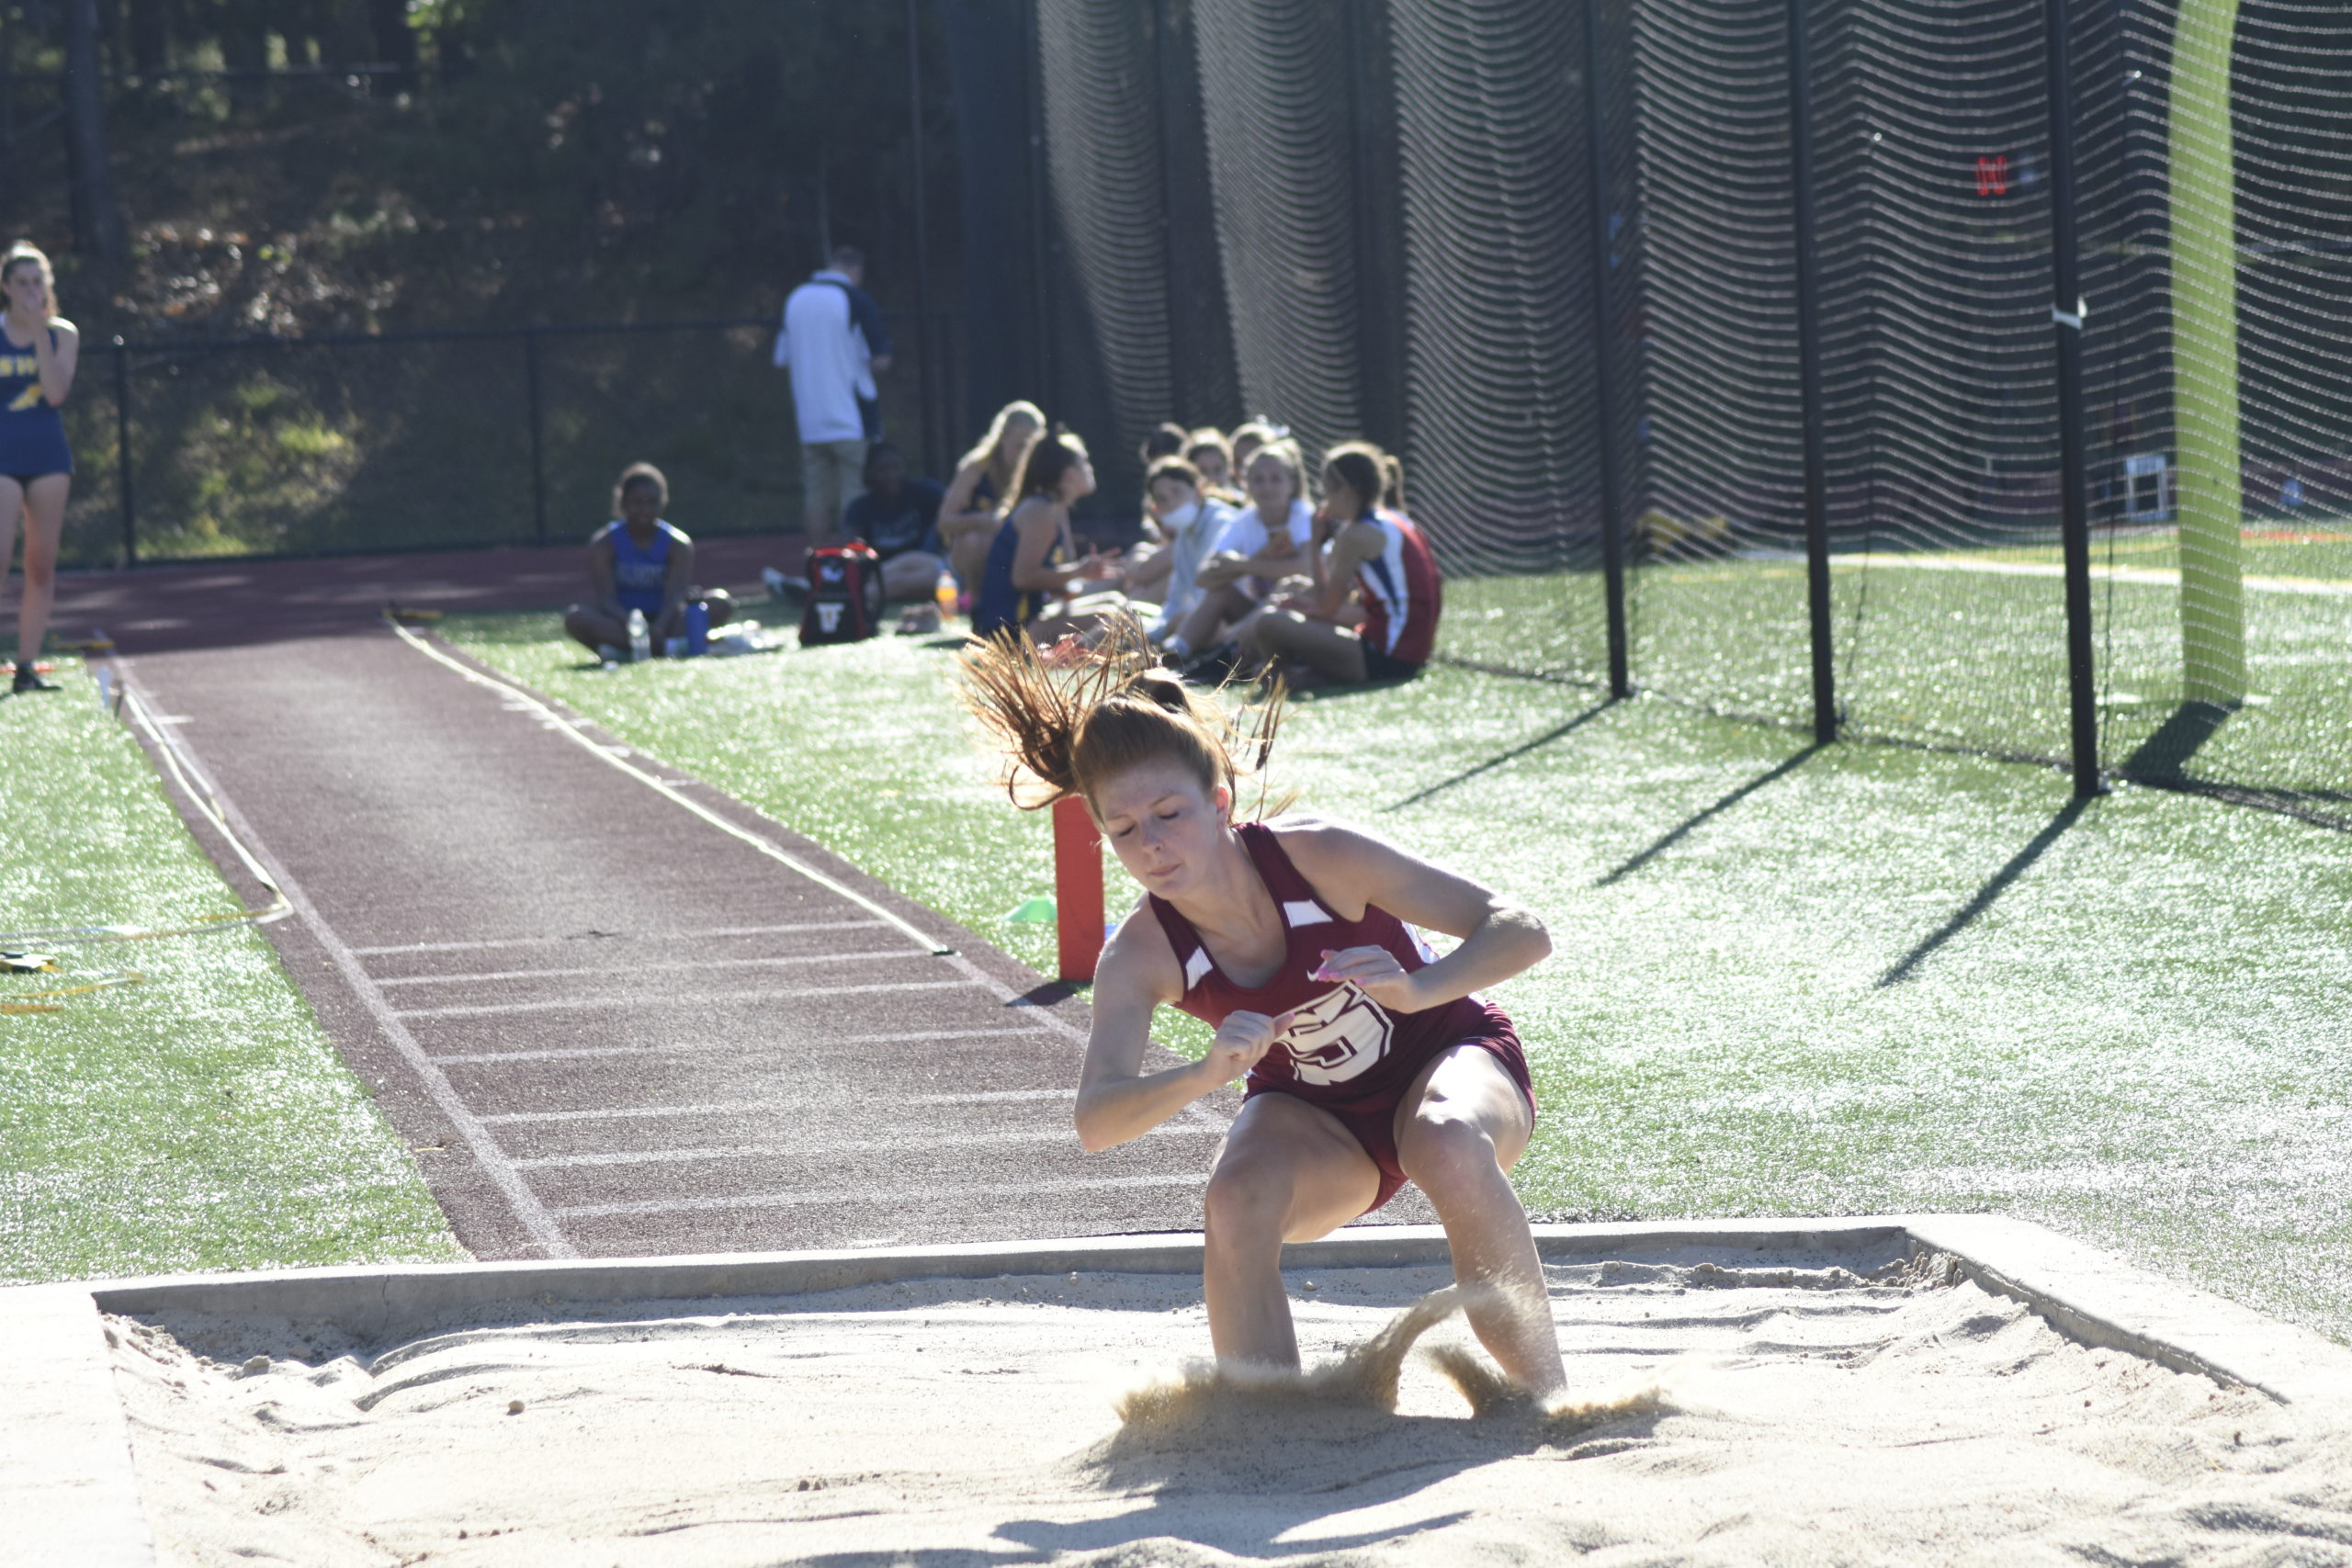 Southampton junior Carli Cameron finished eighth in the triple jump.